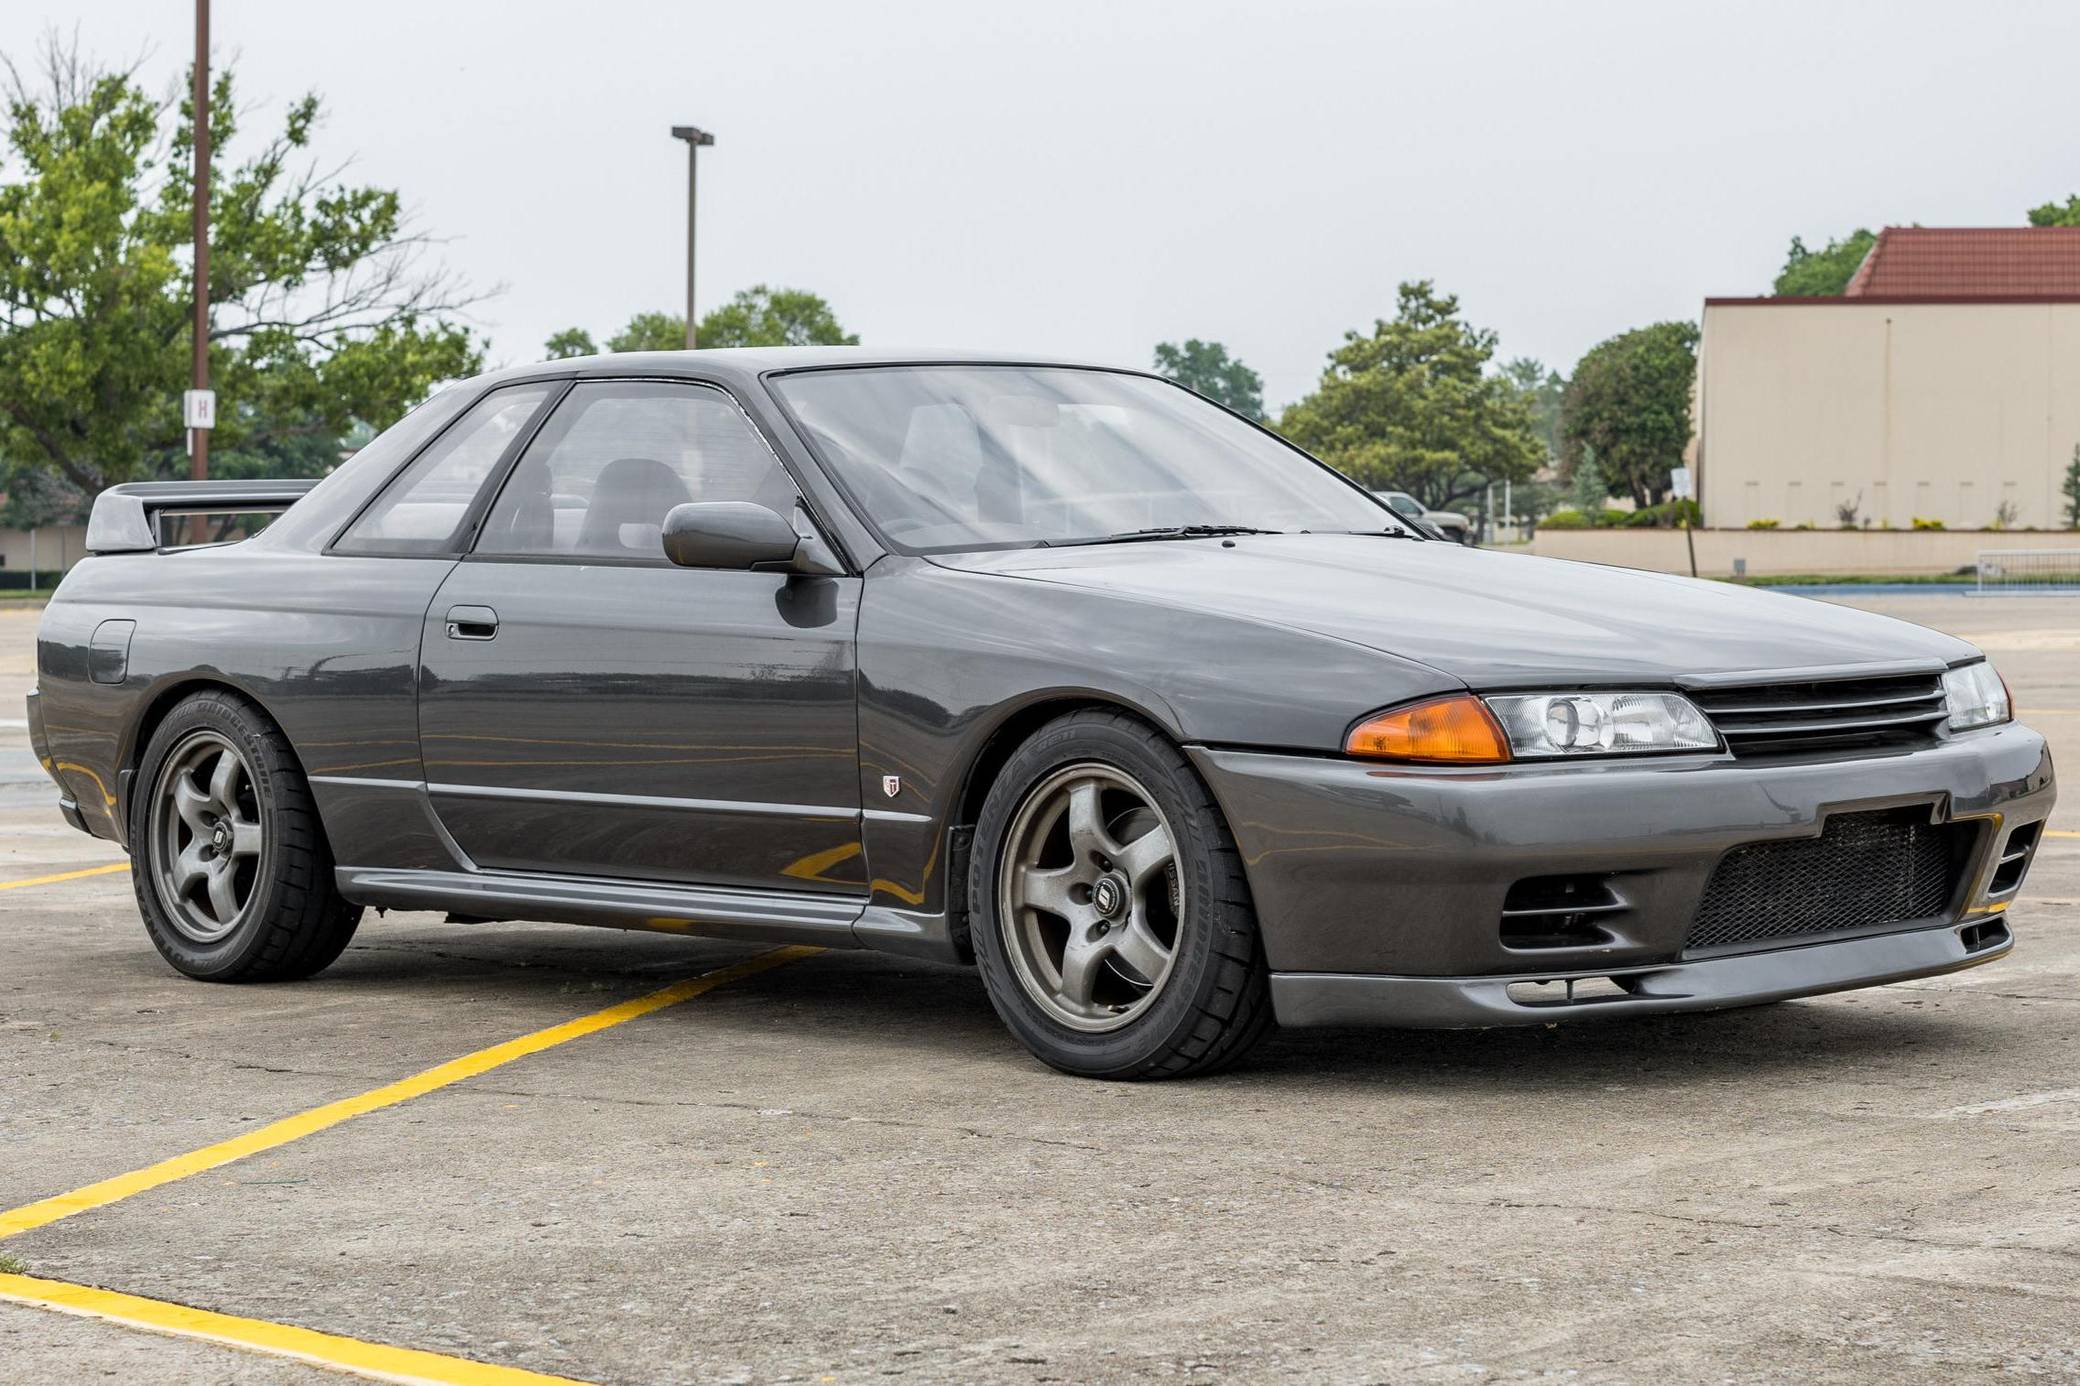 Stock R32 Nissan Skyline GT-R for Sale: Prized Collectable or